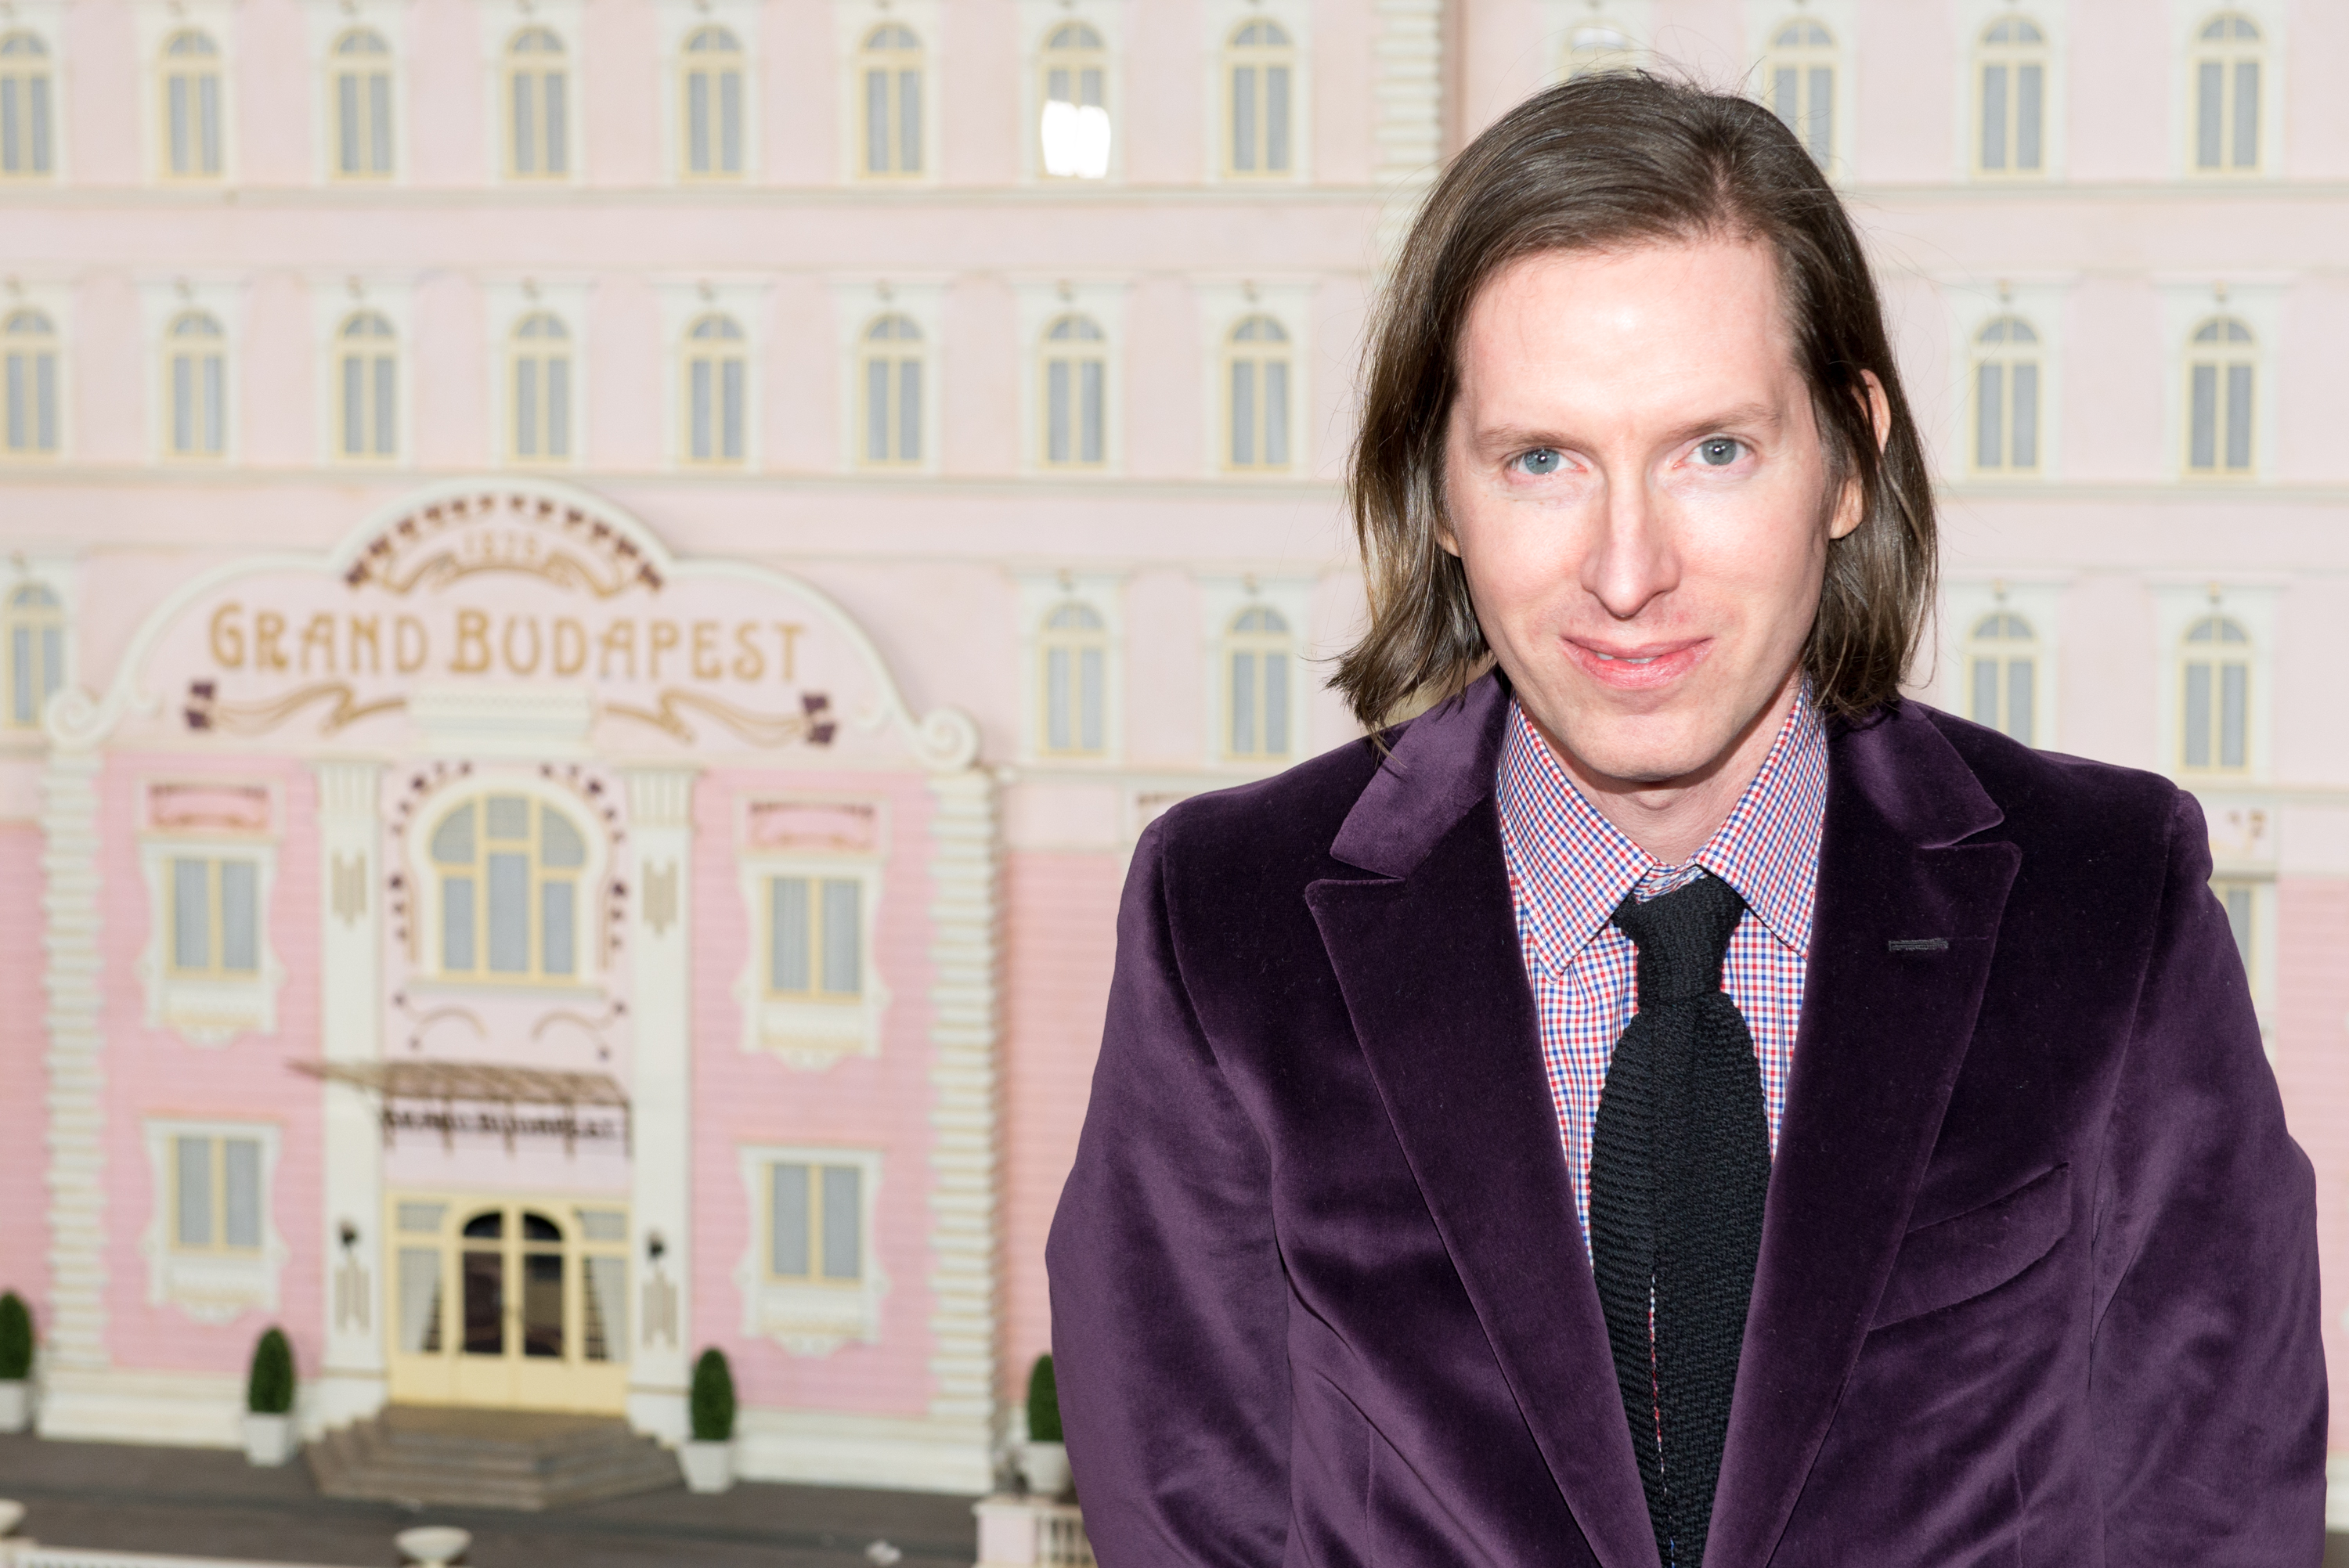 Director Wes Anderson attends "The Grand Budapest Hotel" premiere at Alice Tully Hall on Feb. 26, 2014 in New York City. 